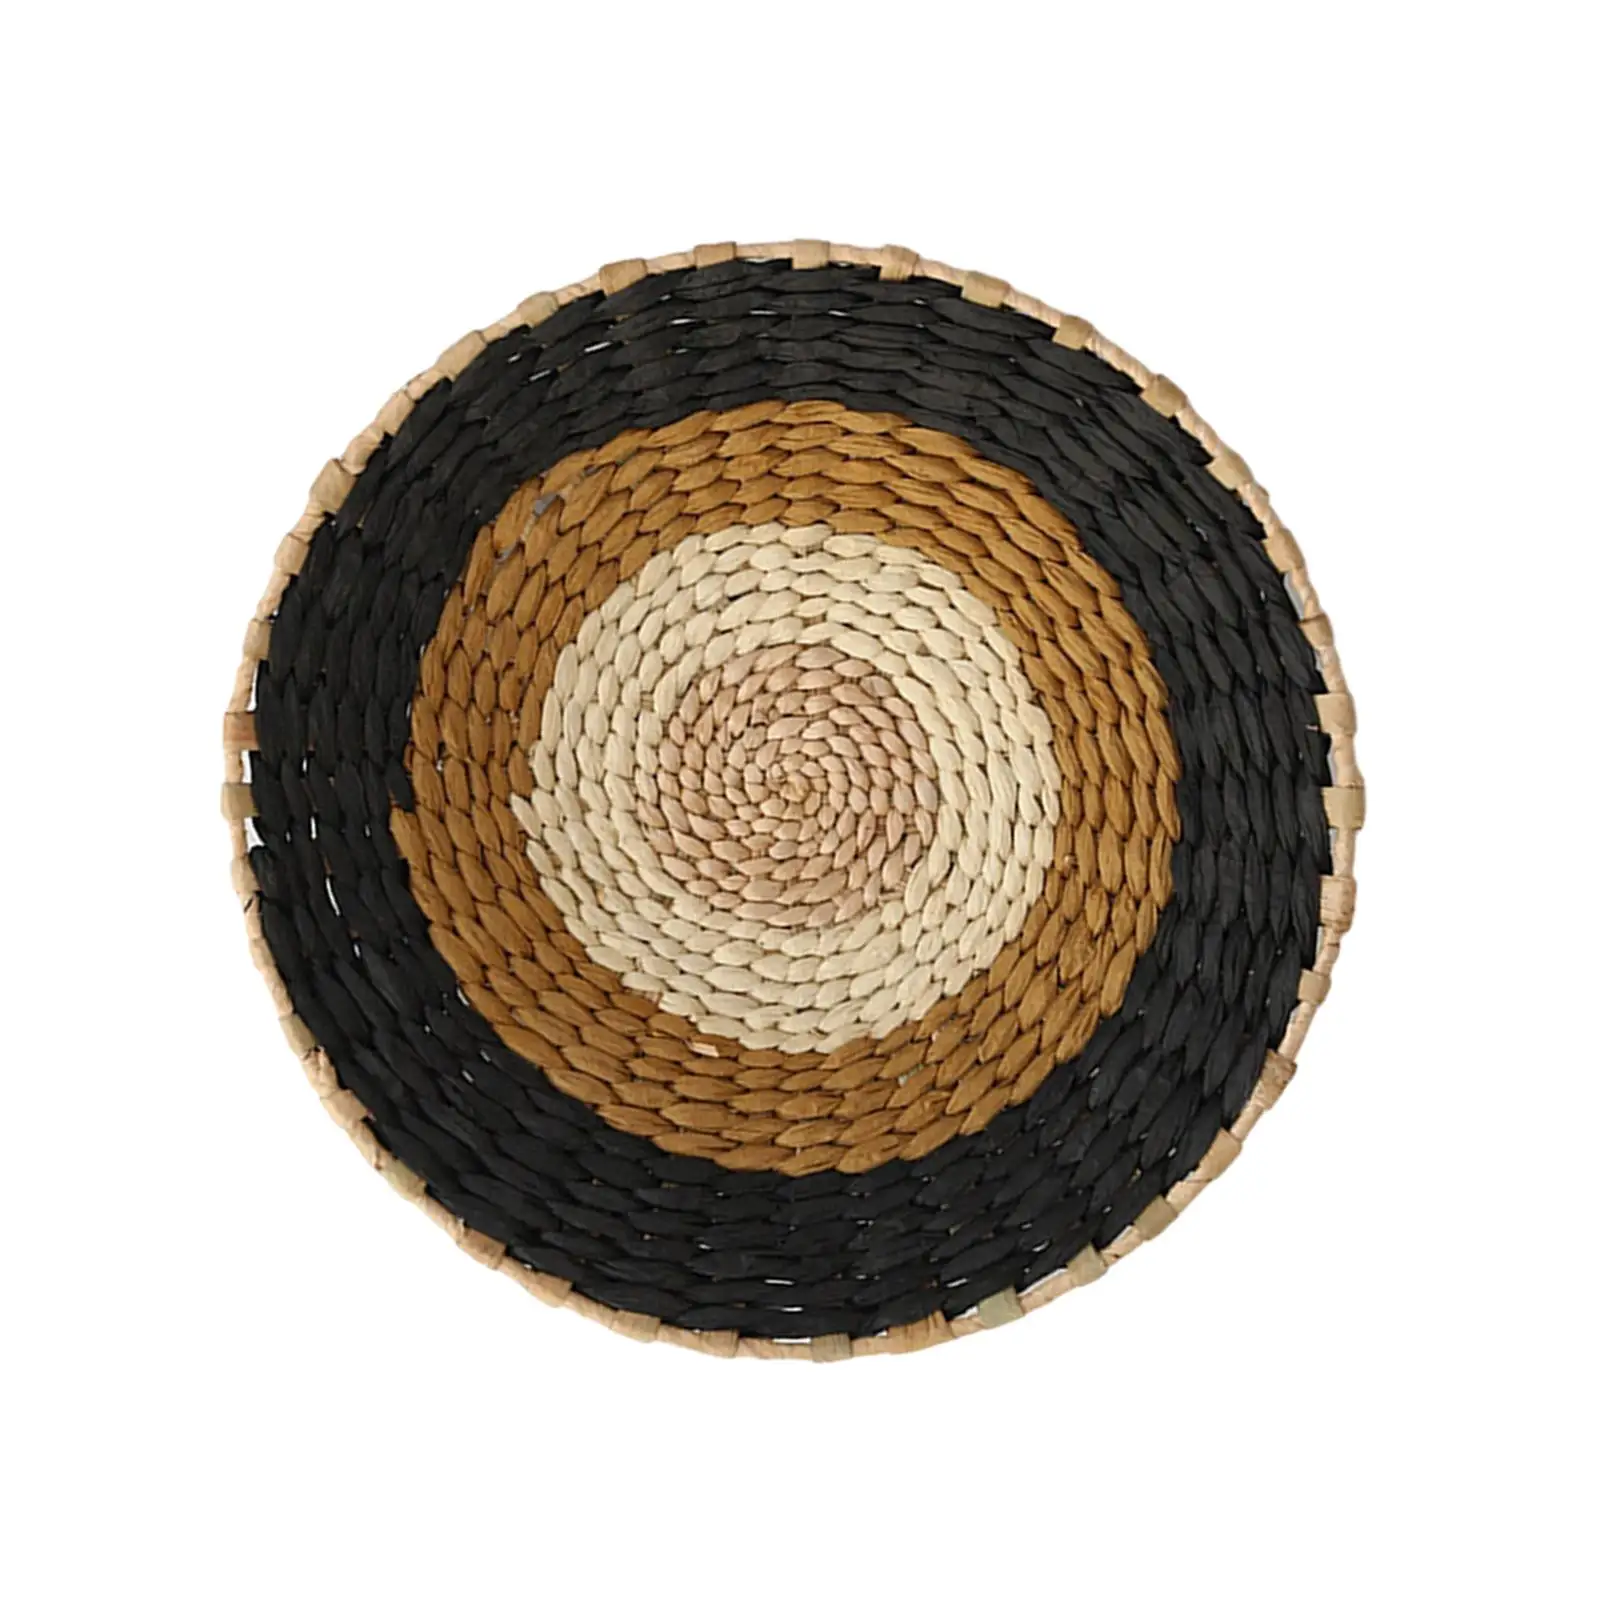 Handmade Wall Decor Hanger Grass Outdoor Round Hanging Tapestry Weave Pattern Decoration for Coffee Table Patio Kitchen Wall